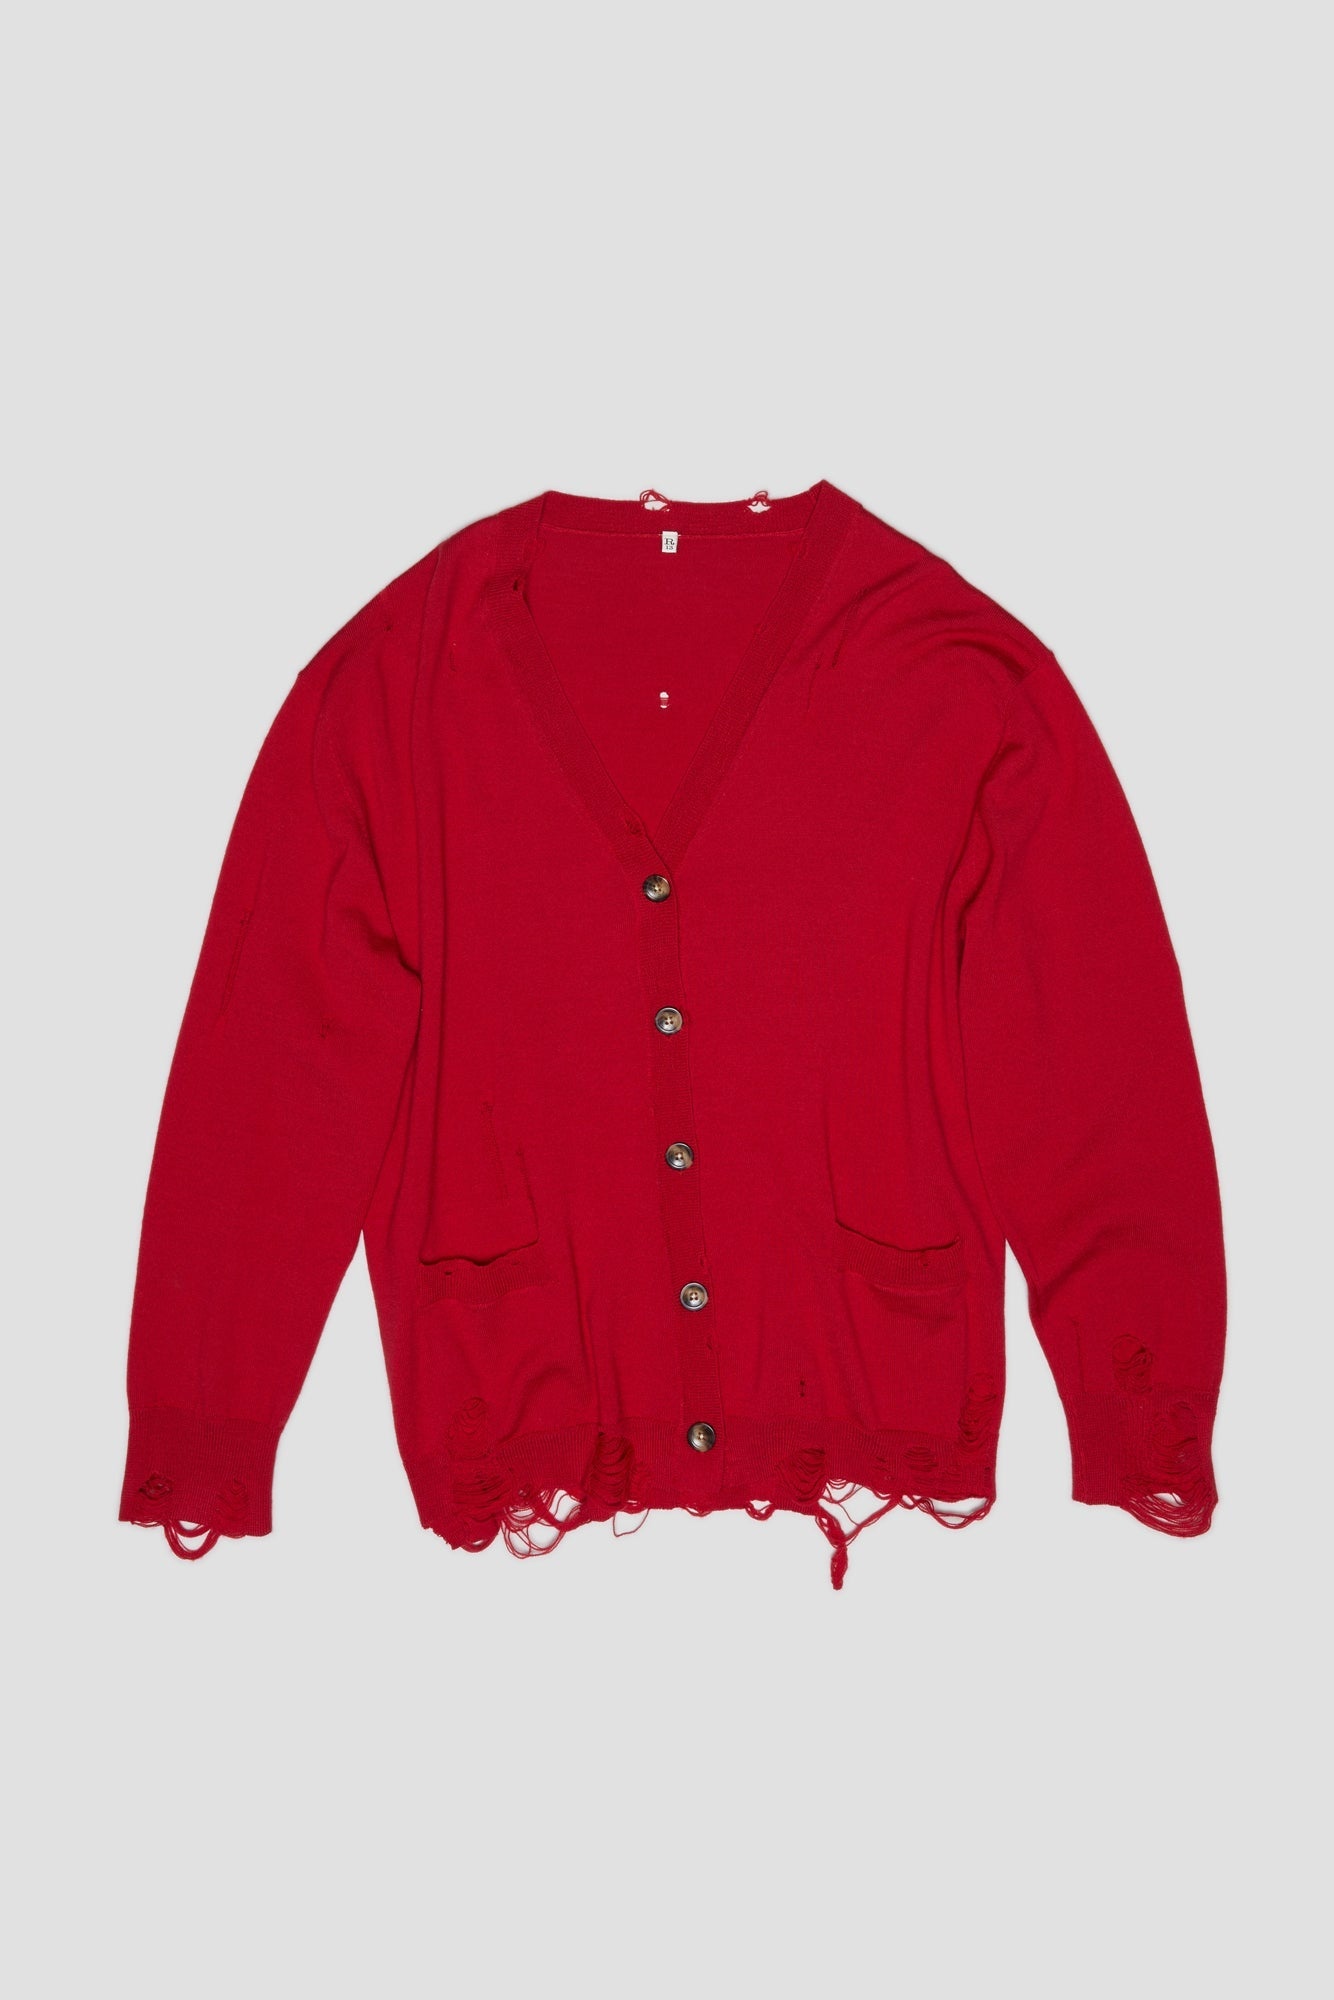 R13 OVERSIZED DISTRESSED CARDIGAN - RED CASHMERE | REVERSIBLE